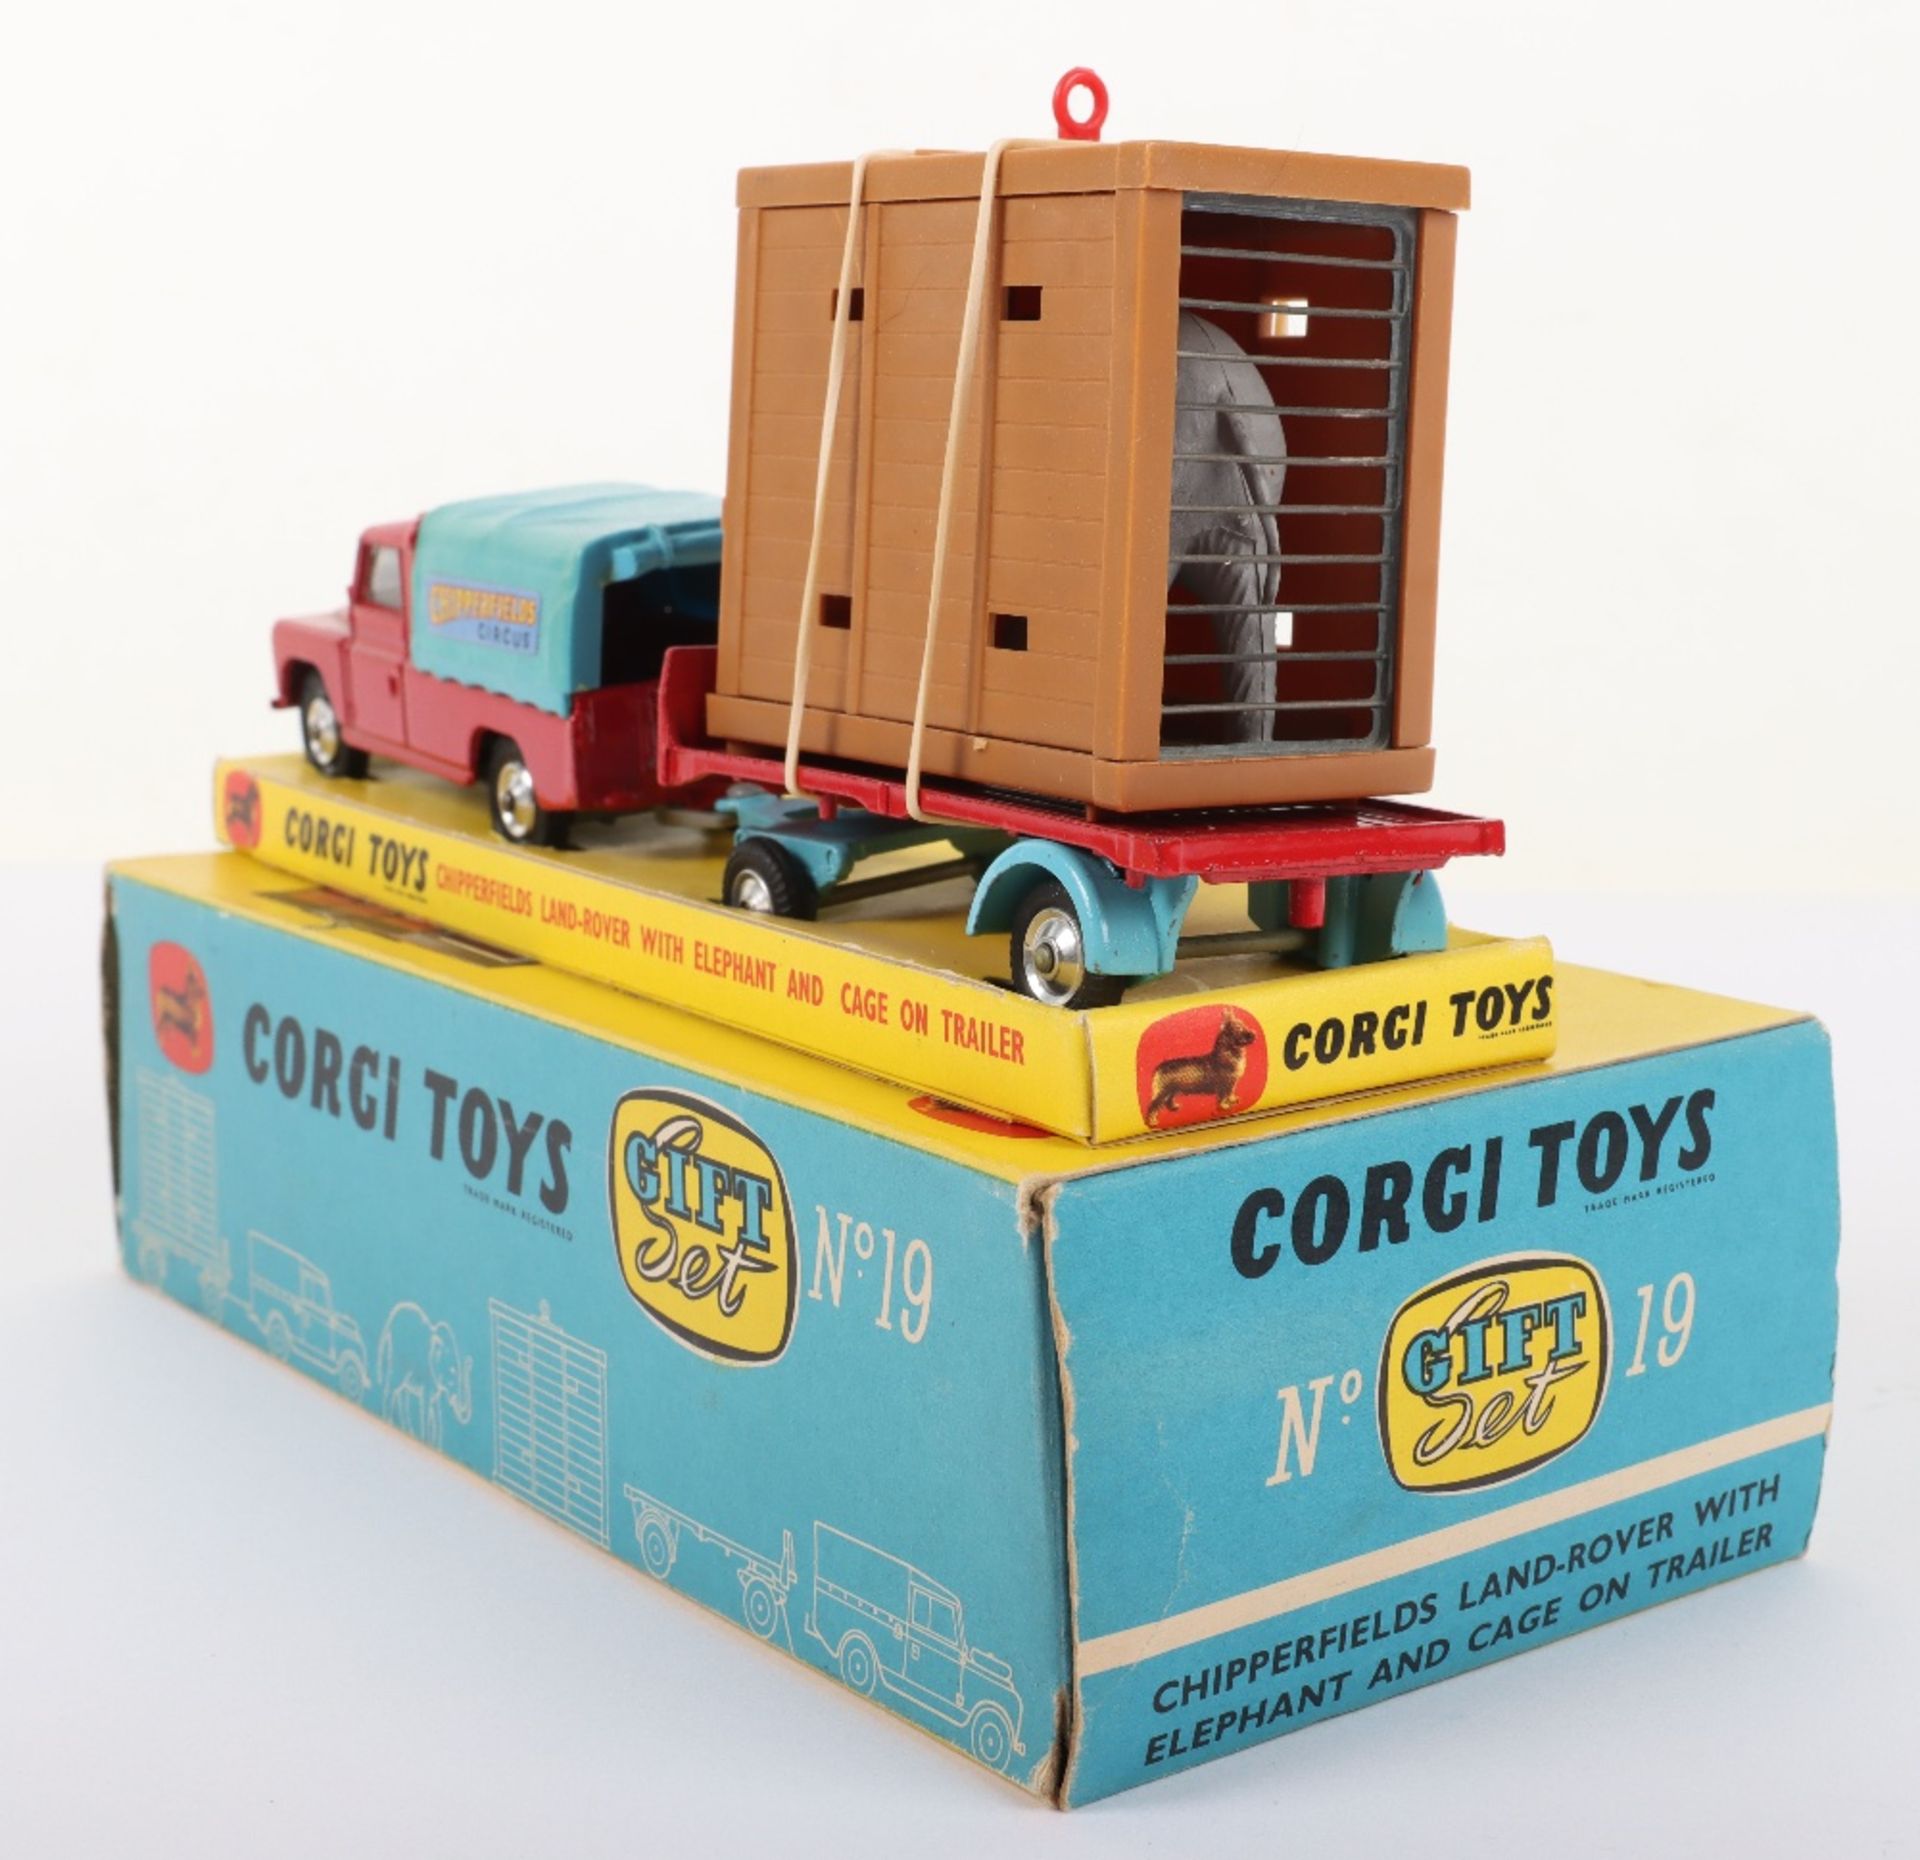 Corgi Toys Gift Set 19 Chipperfield’s Circus Land-Rover with Elephant and Cage on Trailer - Bild 3 aus 4